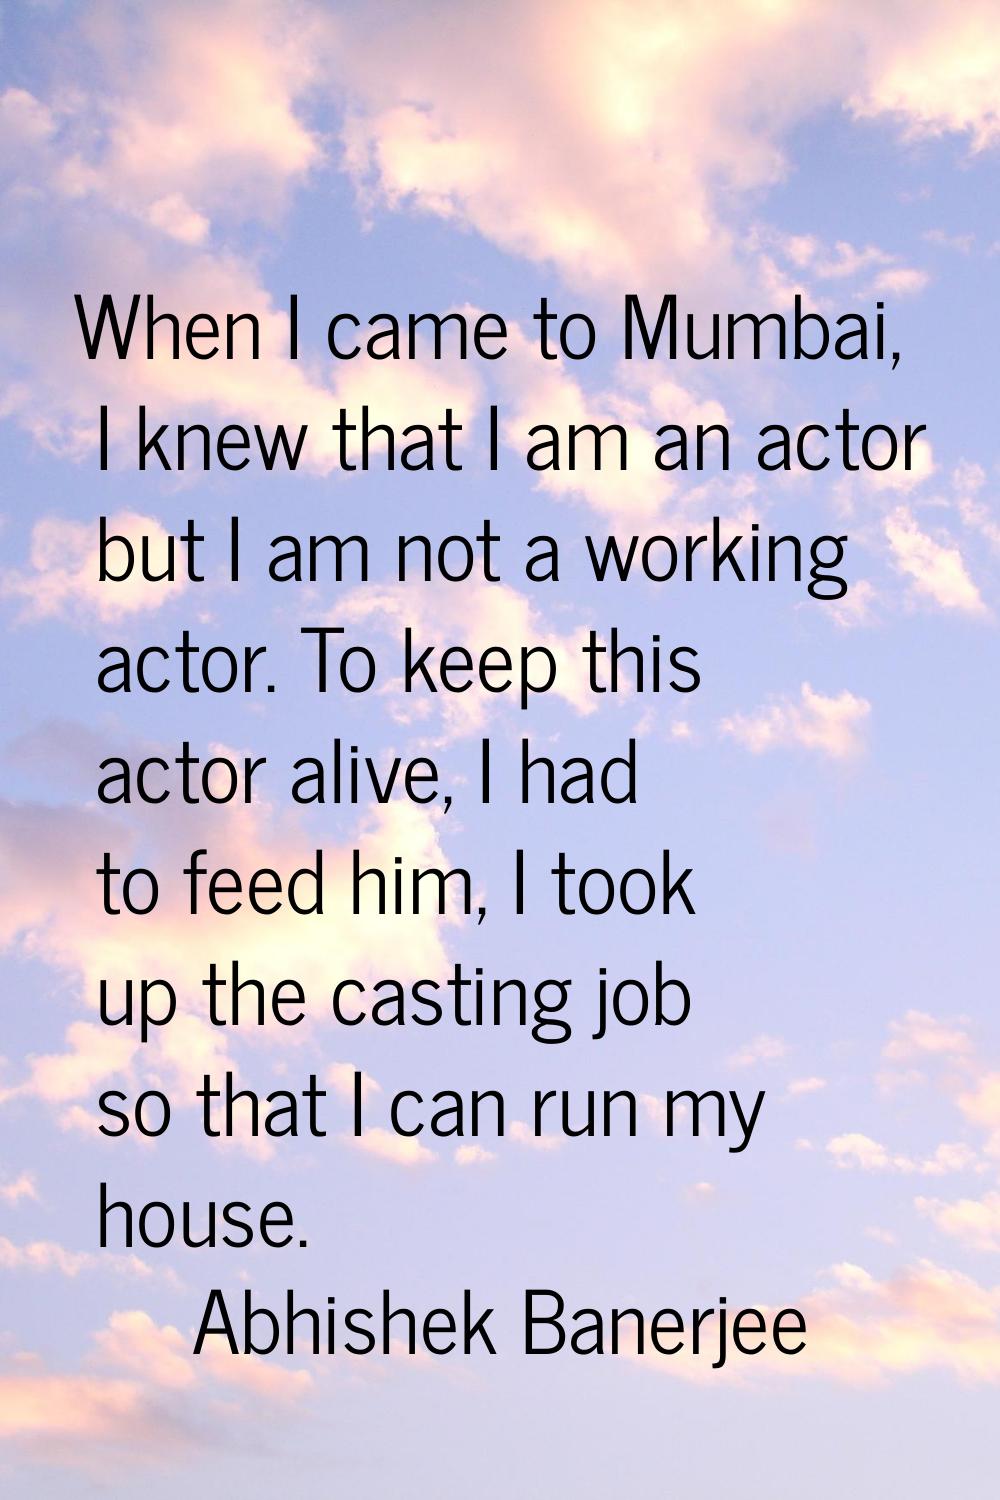 When I came to Mumbai, I knew that I am an actor but I am not a working actor. To keep this actor a